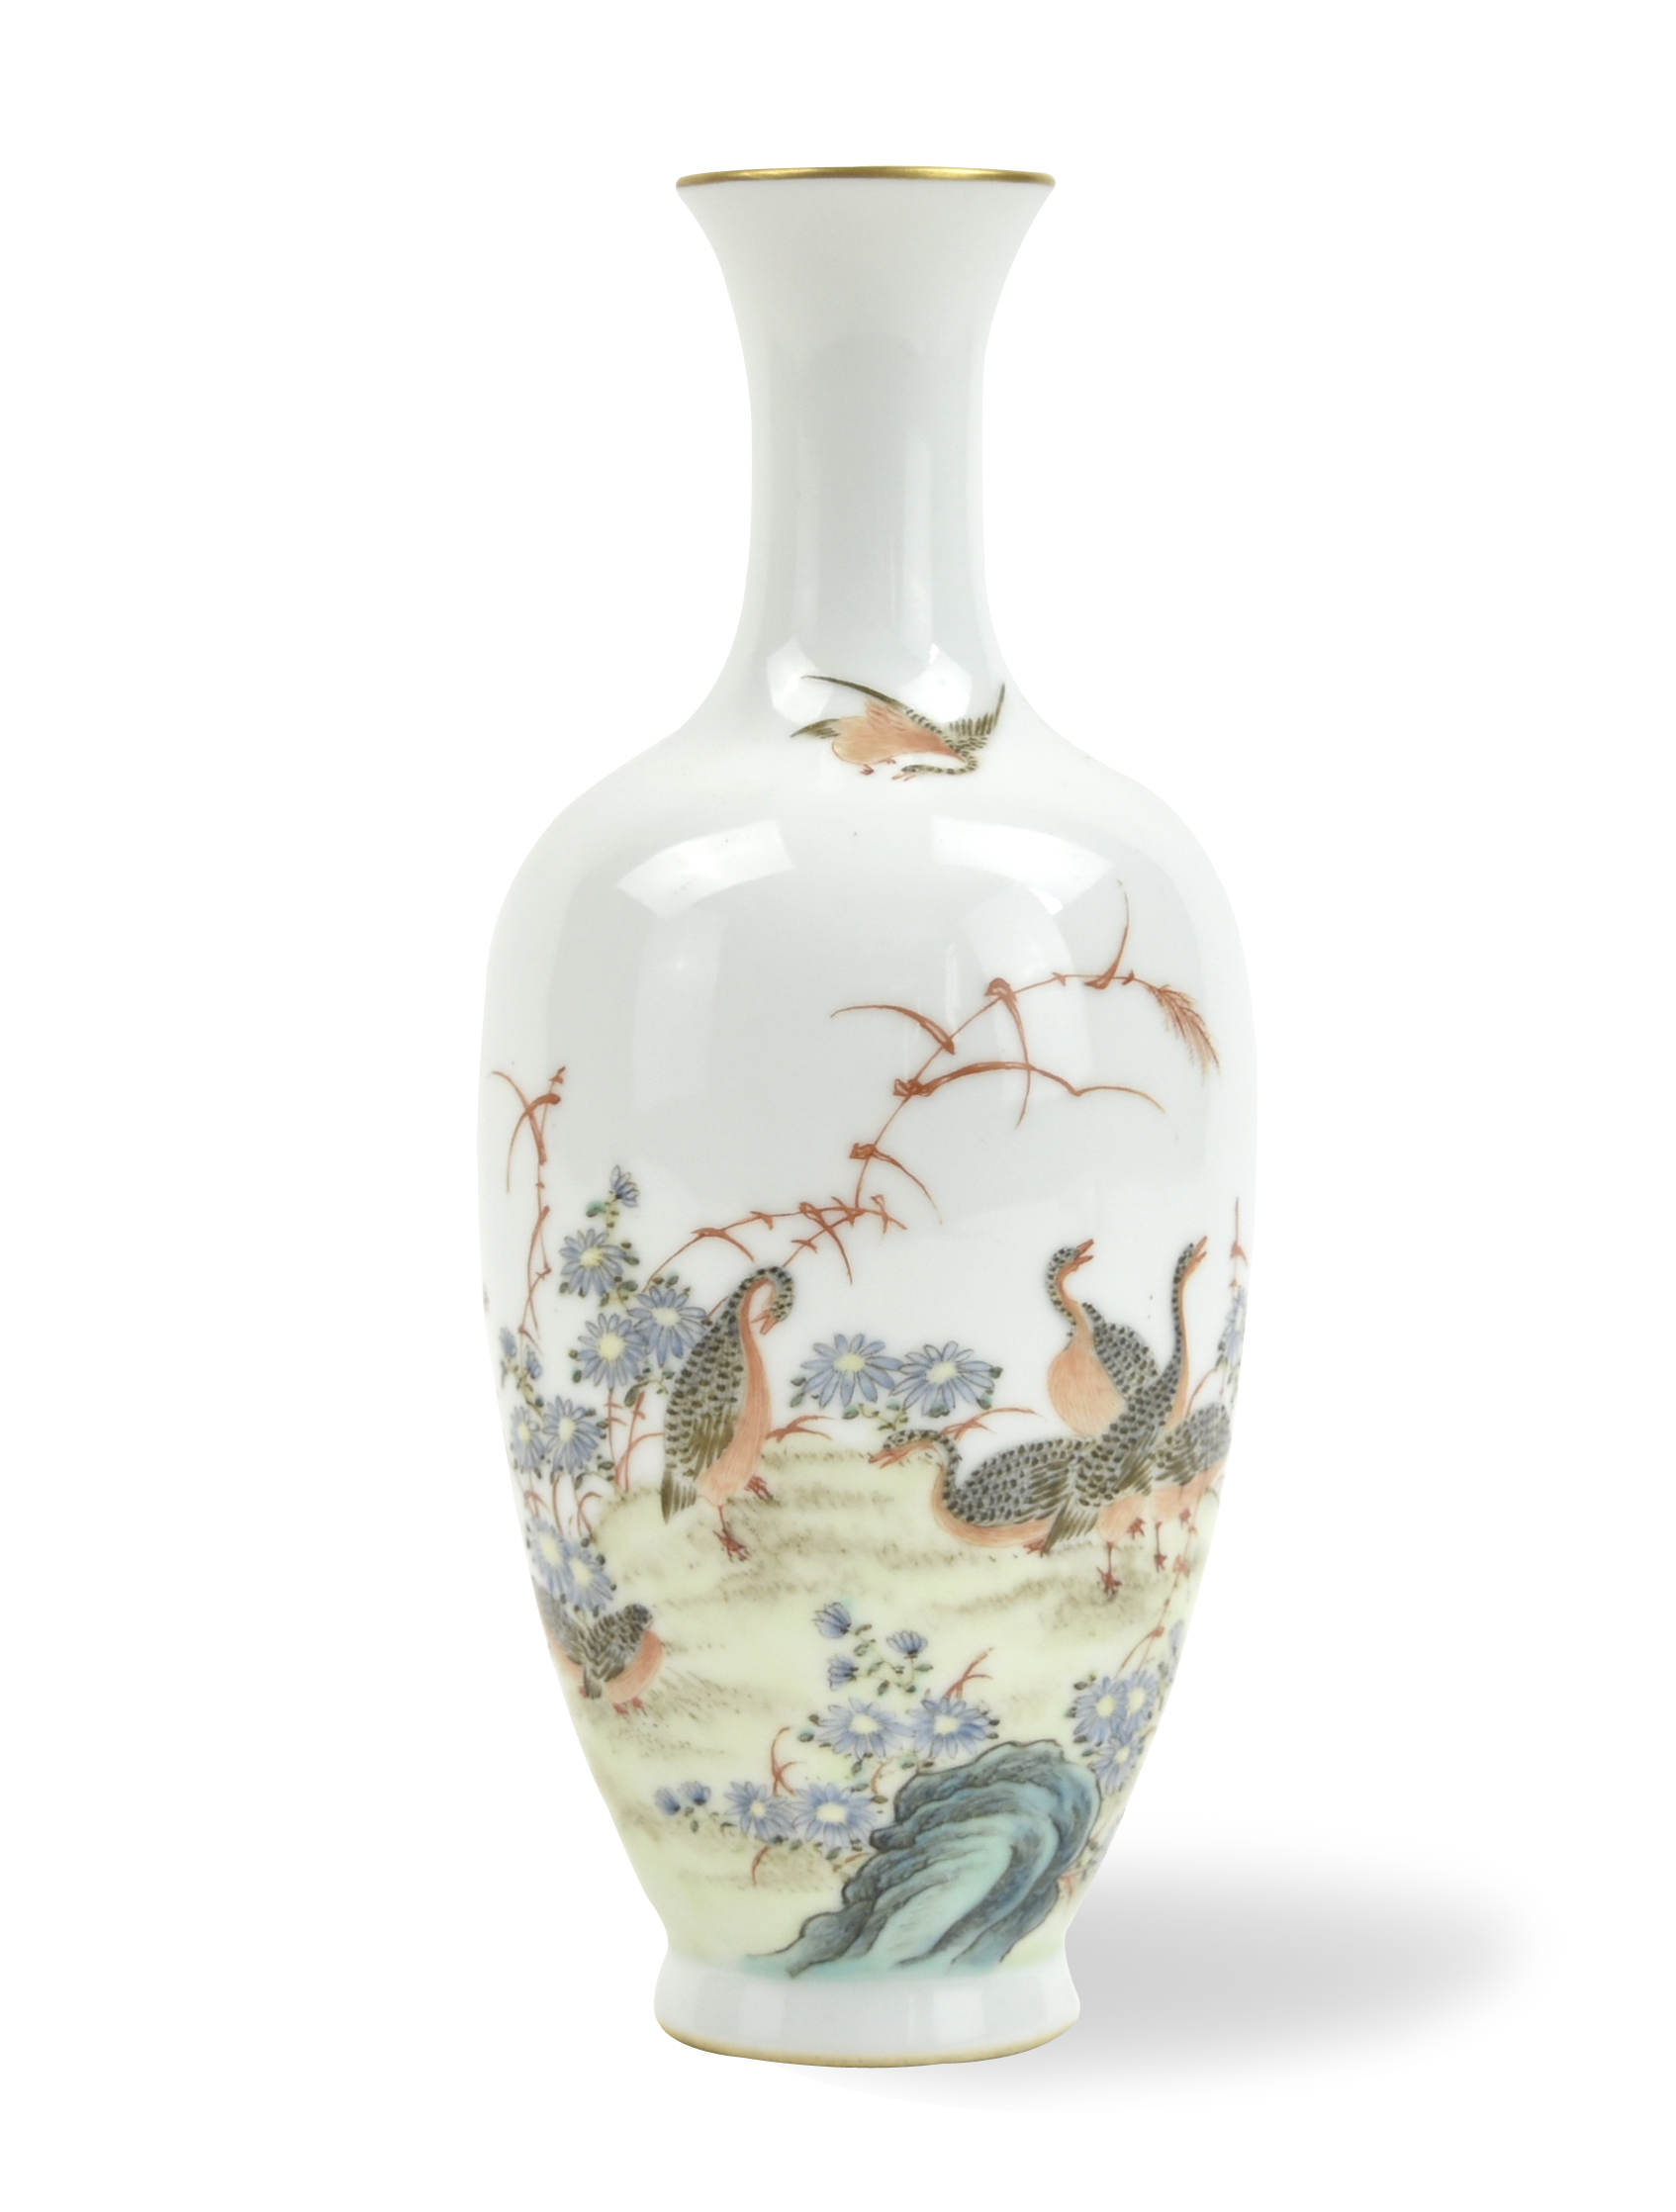 CHINESE FAMILLE ROSE "DUCK" VASE